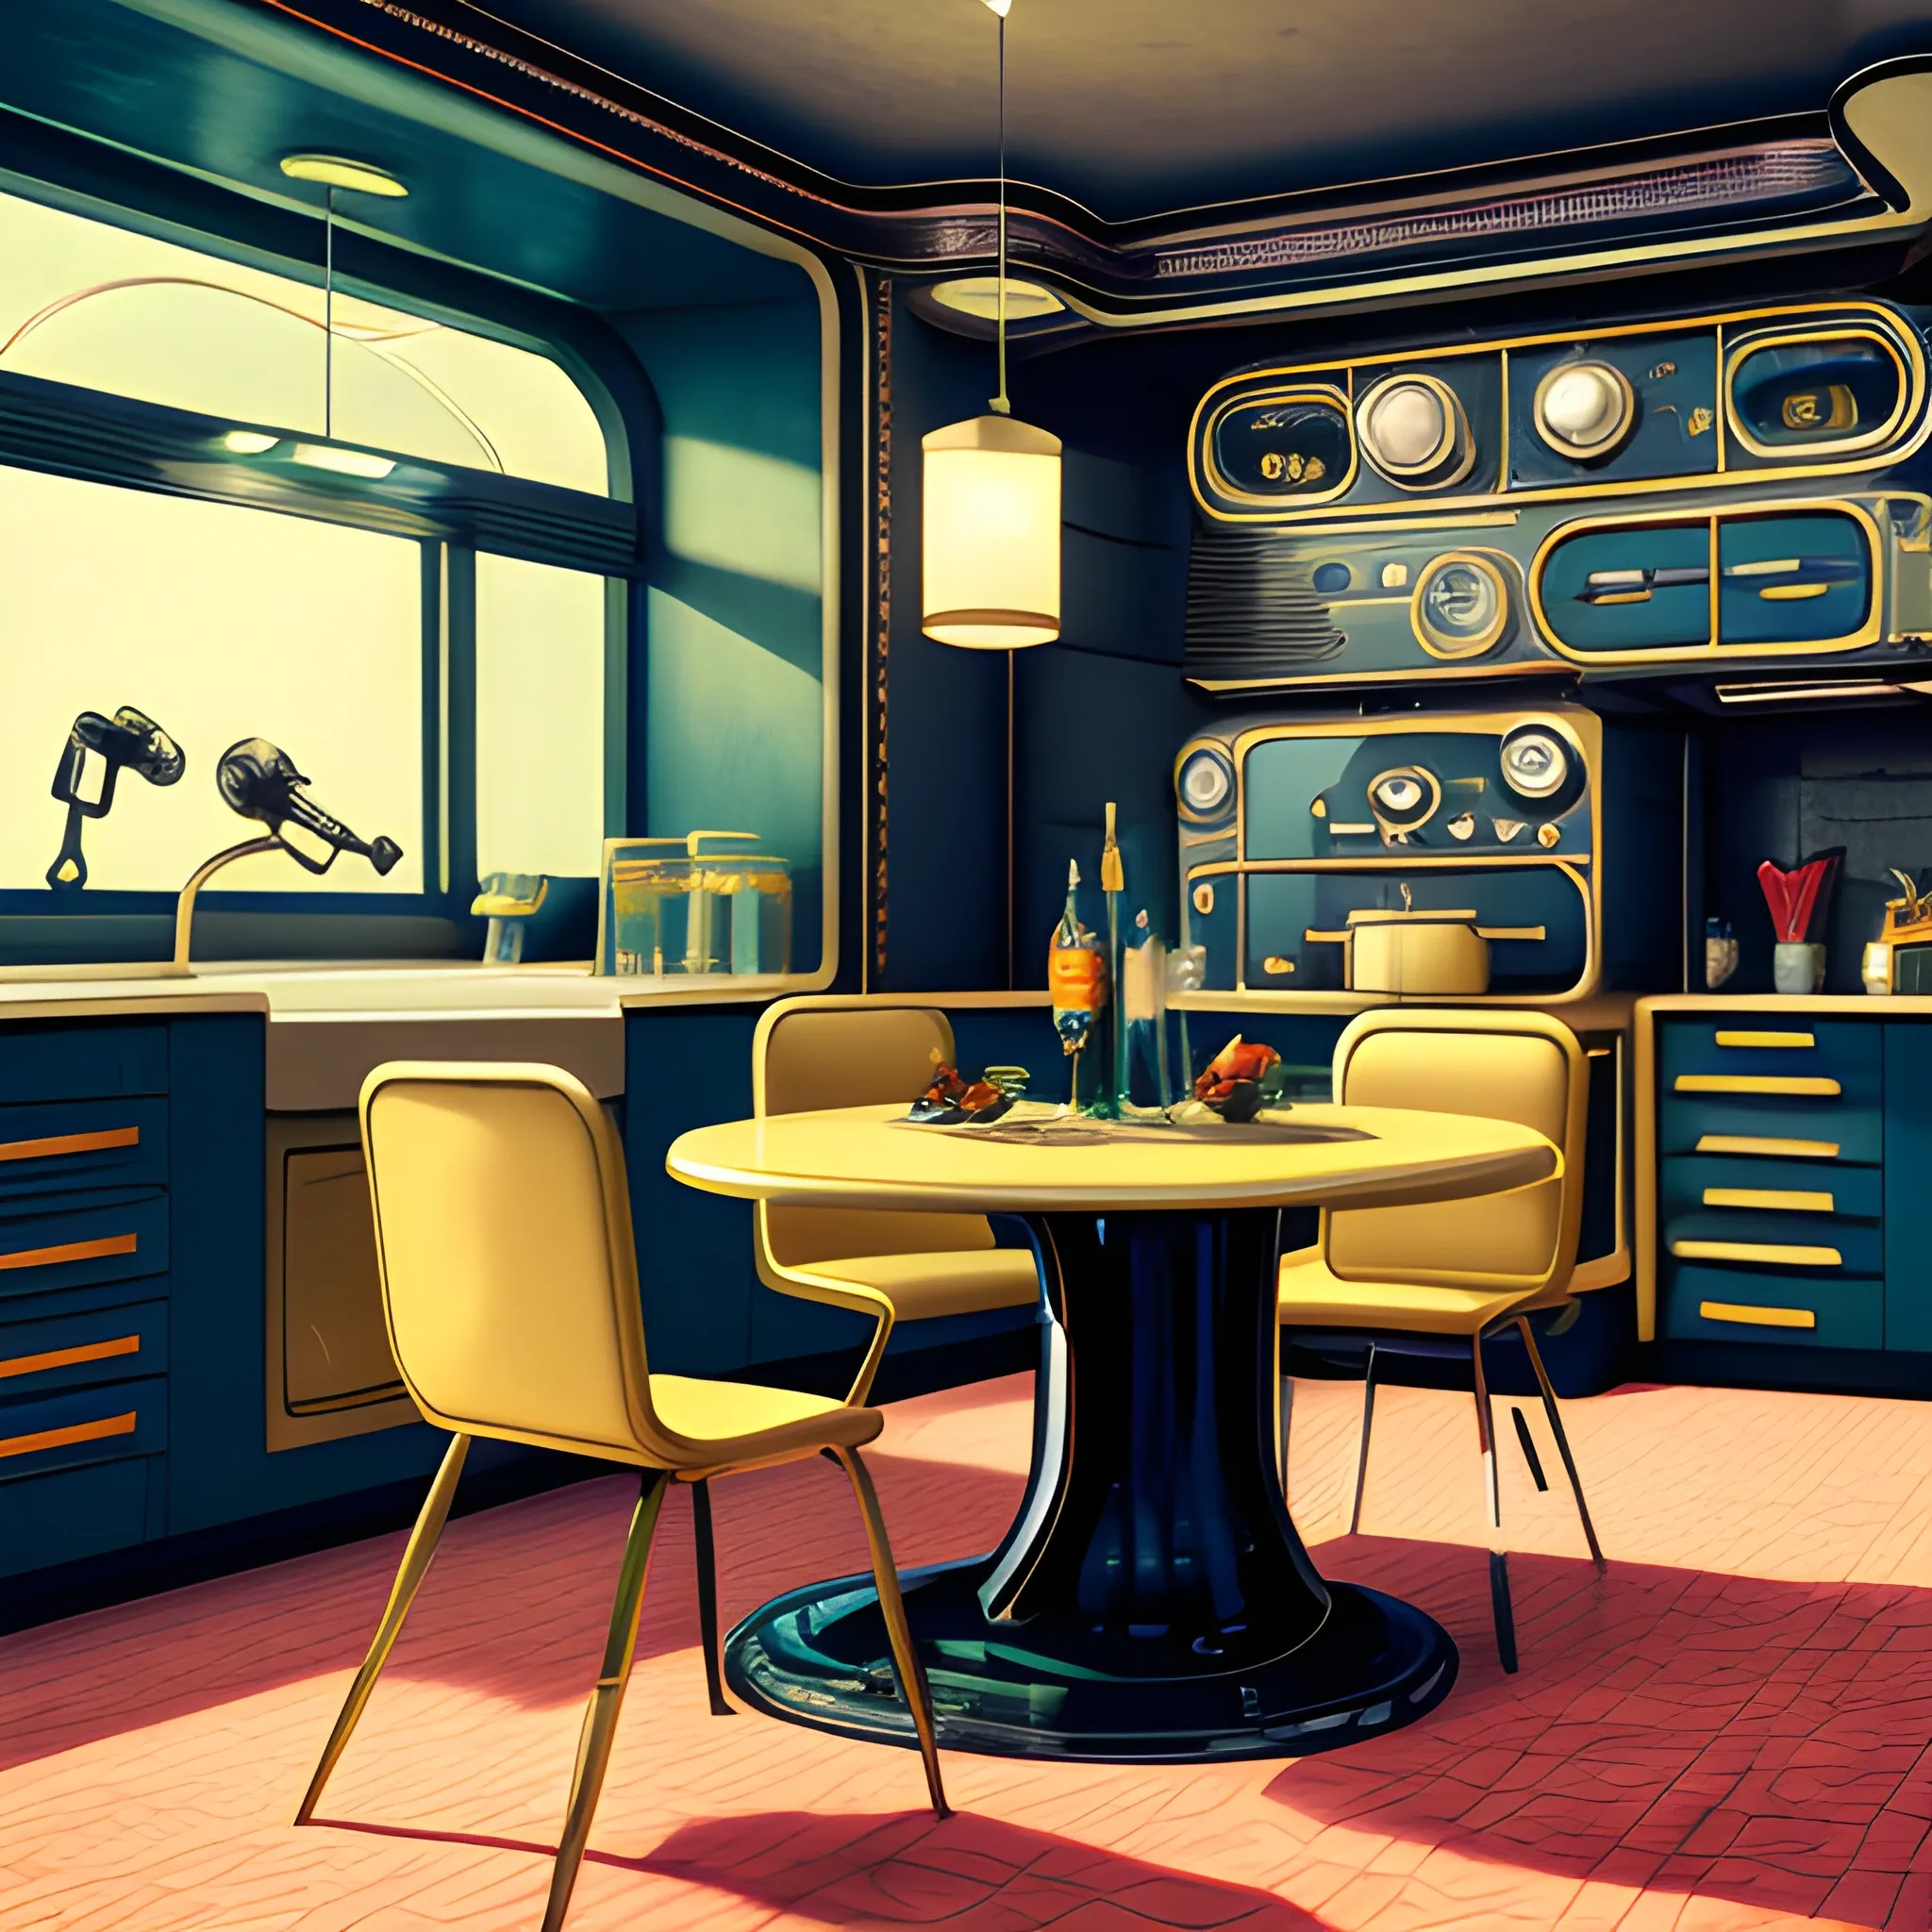 Kitchen, fancy dinner, retro futuristic, highly detailed, realistic, 4k, robot maid, retro style, Luxurious furniture